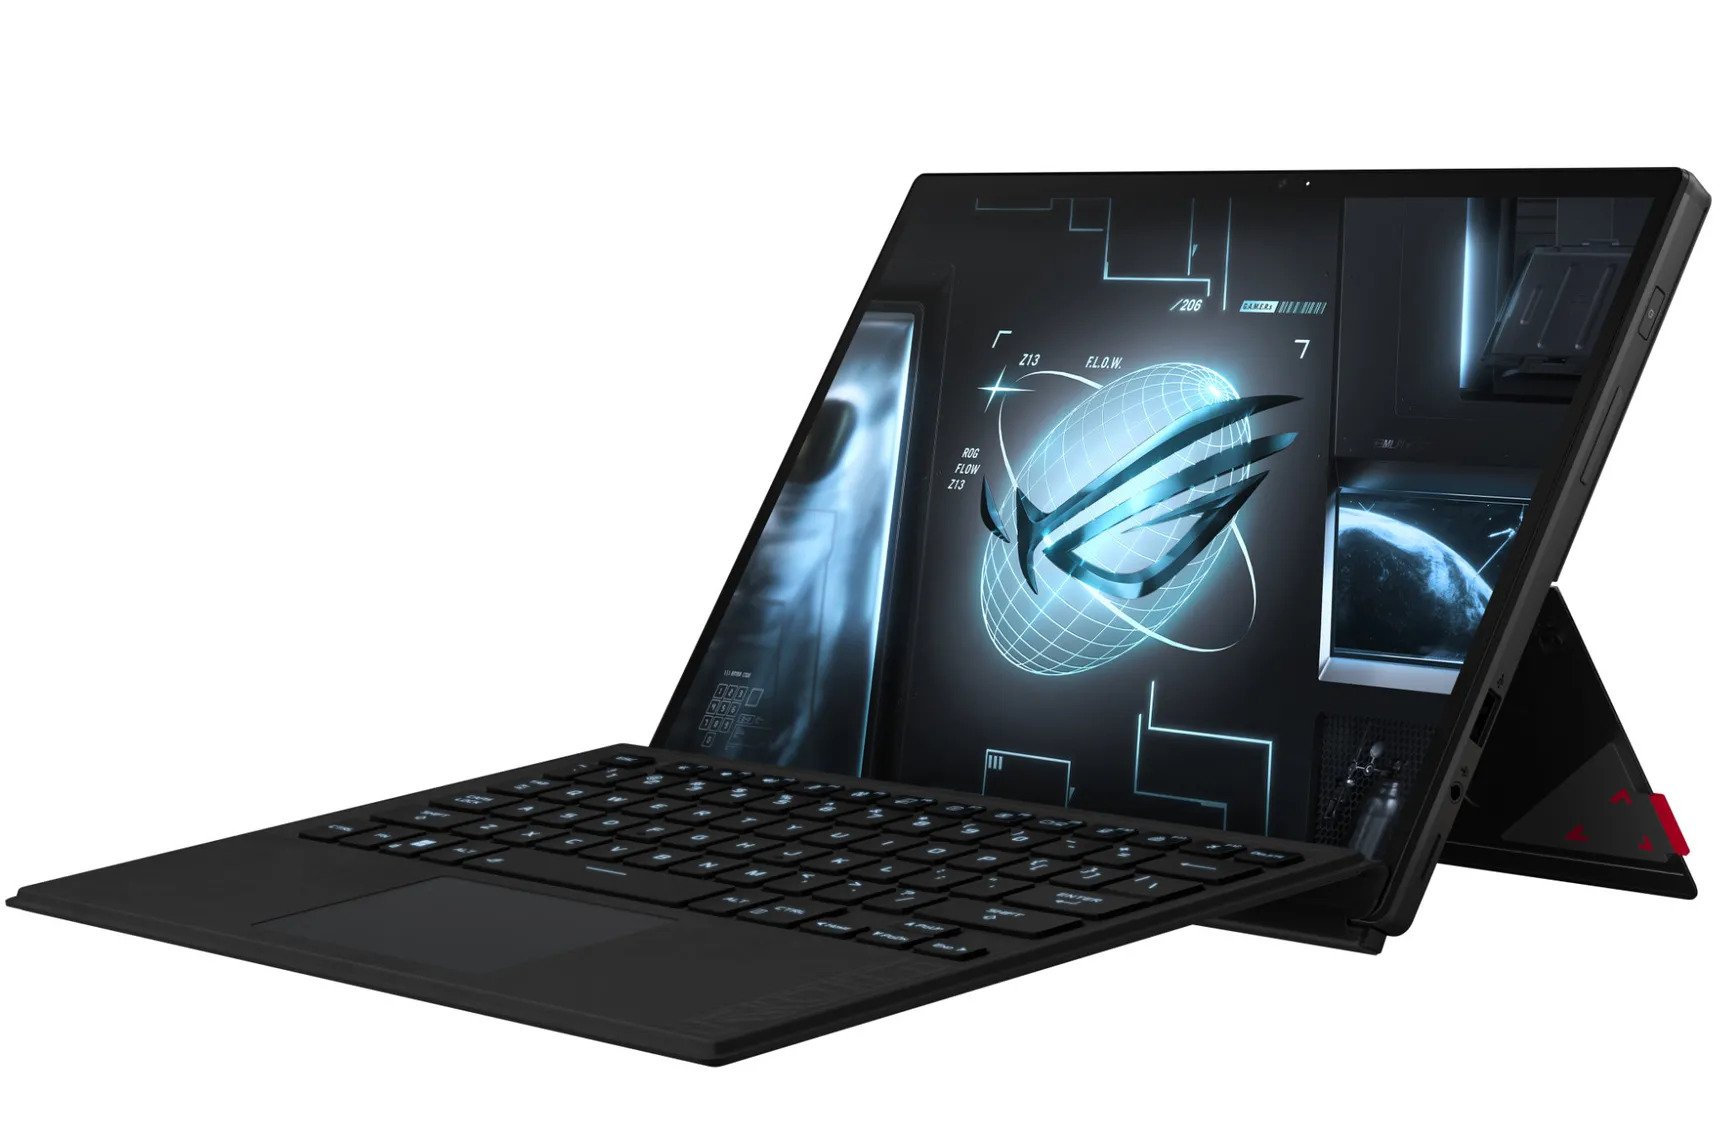 ASUS ROG Flow Z13 gaming tablet powered by Intel Core i9 processor